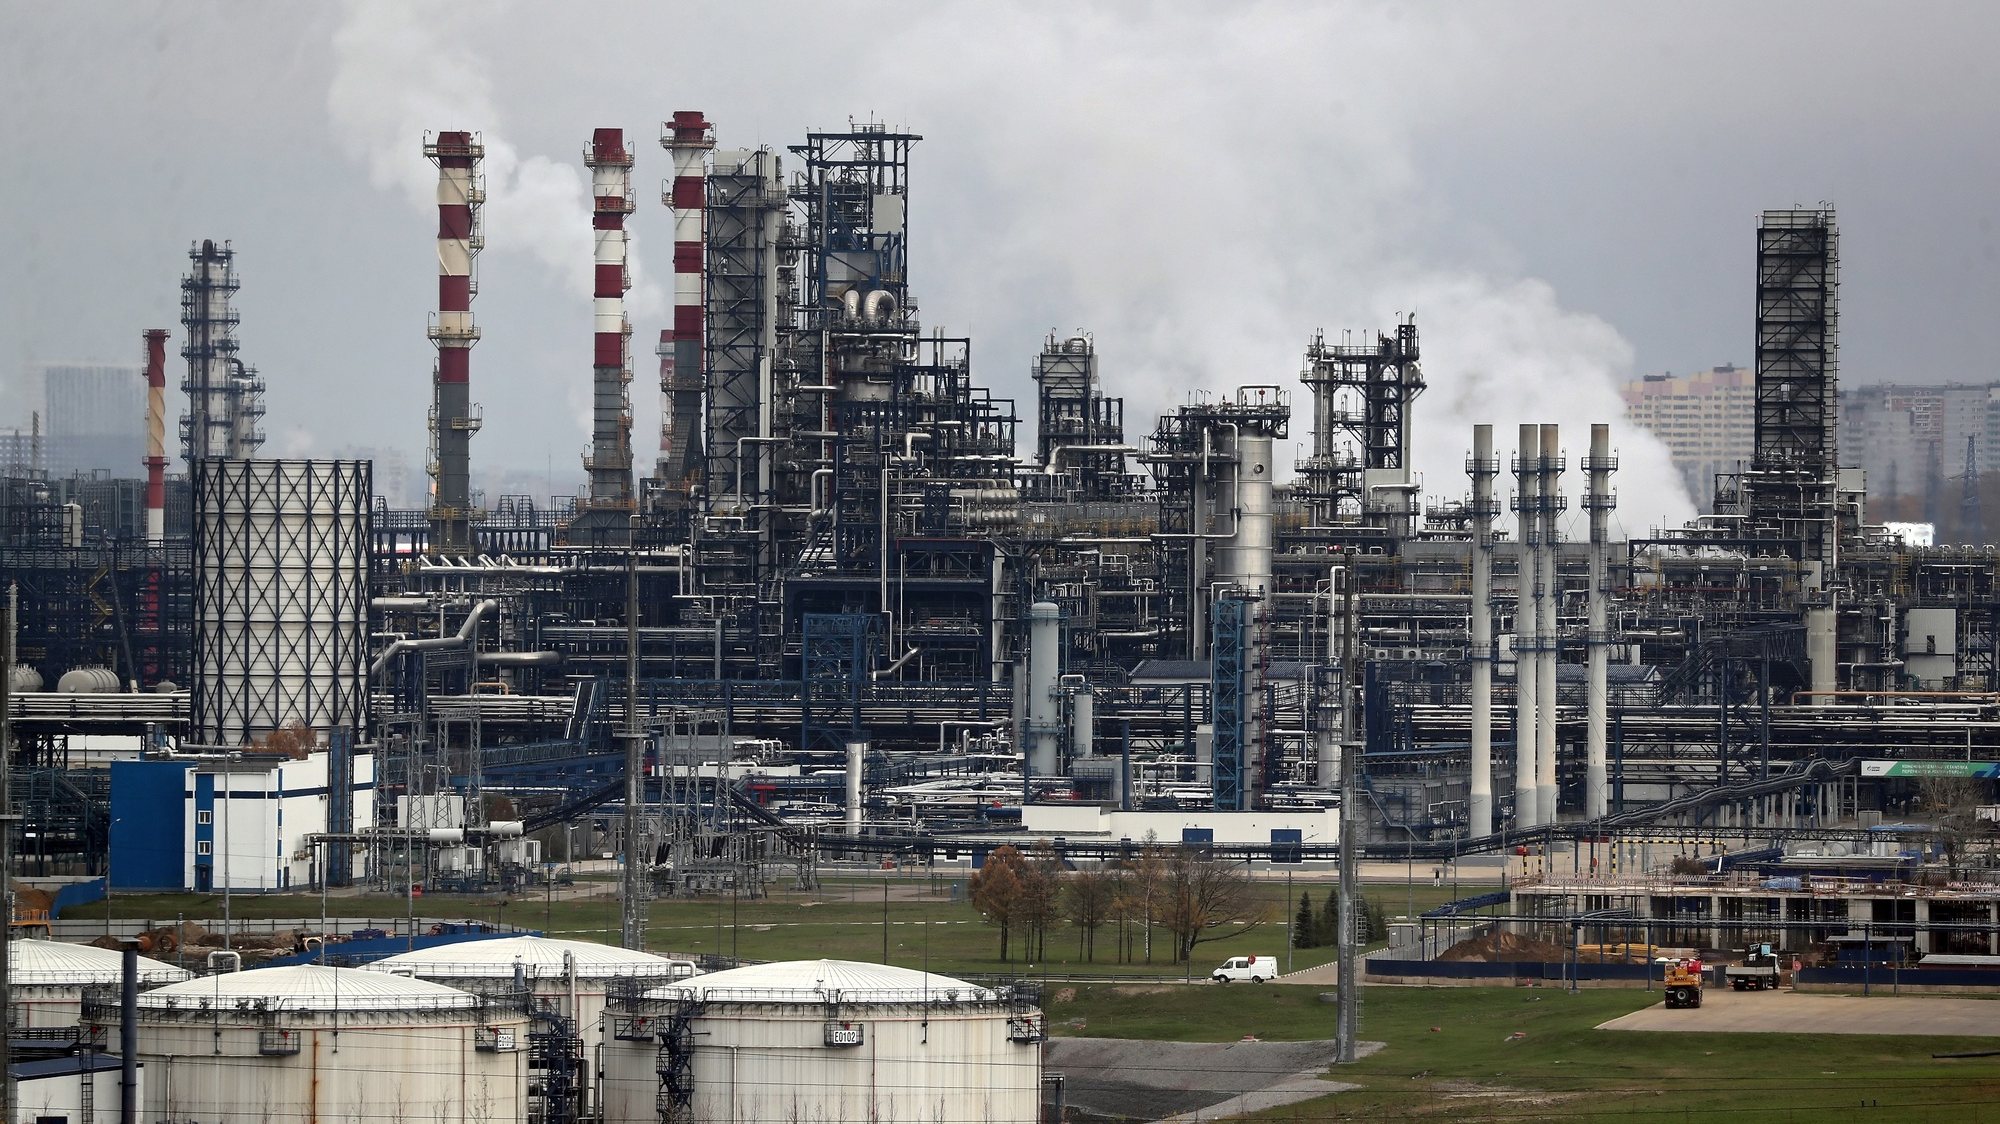 epa10269172 A view of the Gazpromneft MNPZ Moscow Petroleum Refinery JSC in Moscow, Russia, 27 October 2022. US officials reworks plan for Russia oil-price cap, following skepticism by investors and growing risk in financial markets.  EPA/MAXIM SHIPENKOV